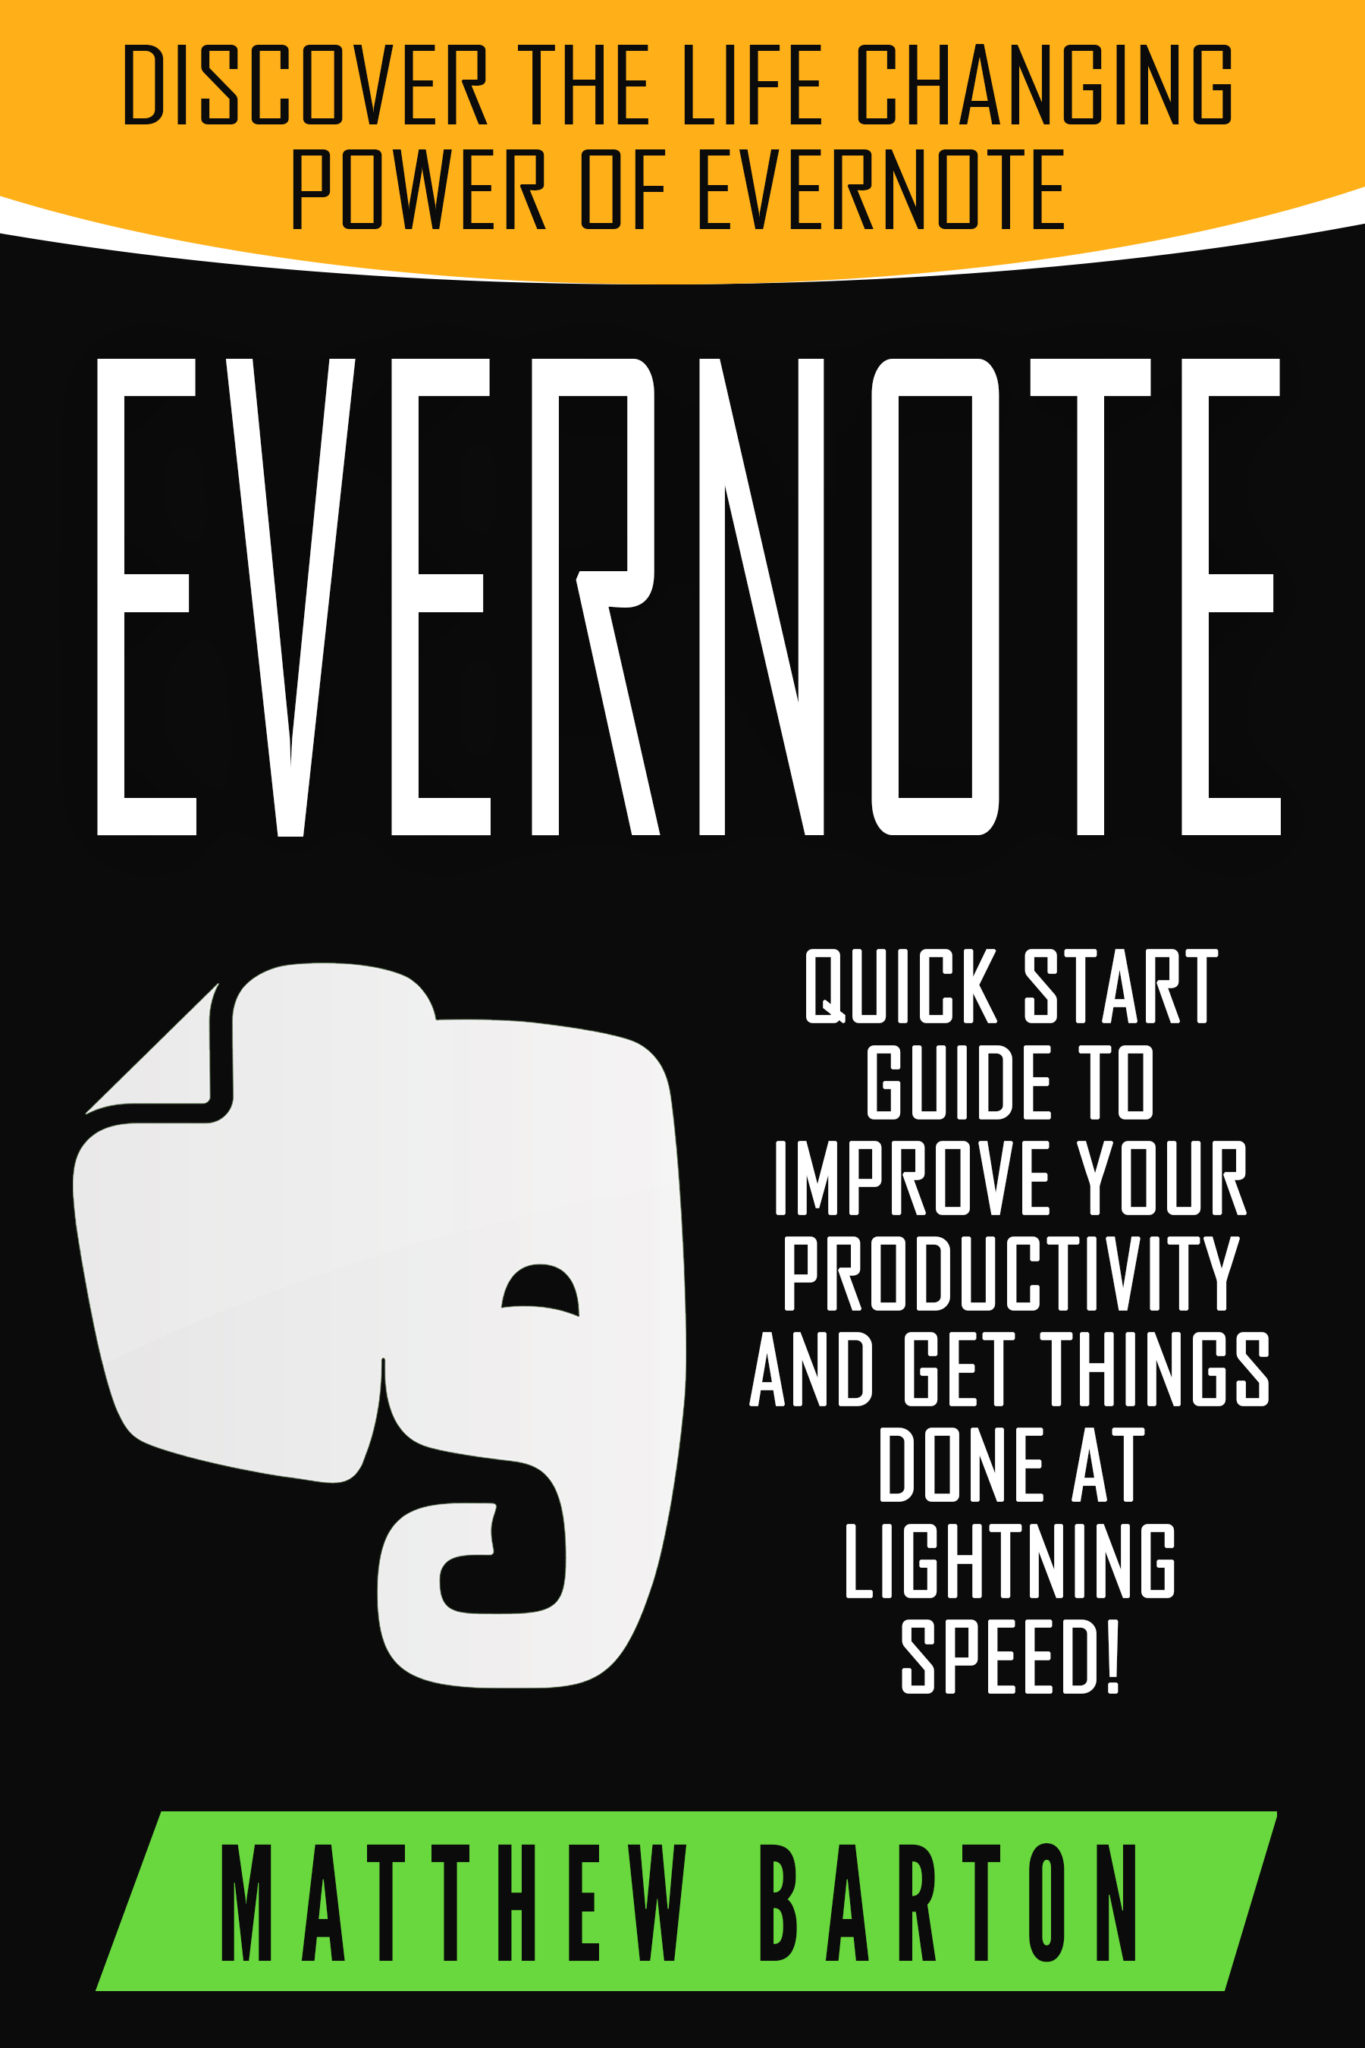 FREE: Evernote: Discover The Life Changing Power of Evernote. Quick Start Guide To Improve Your Productivity And Get Things Done At Lightning Speed! by Matthew Barton